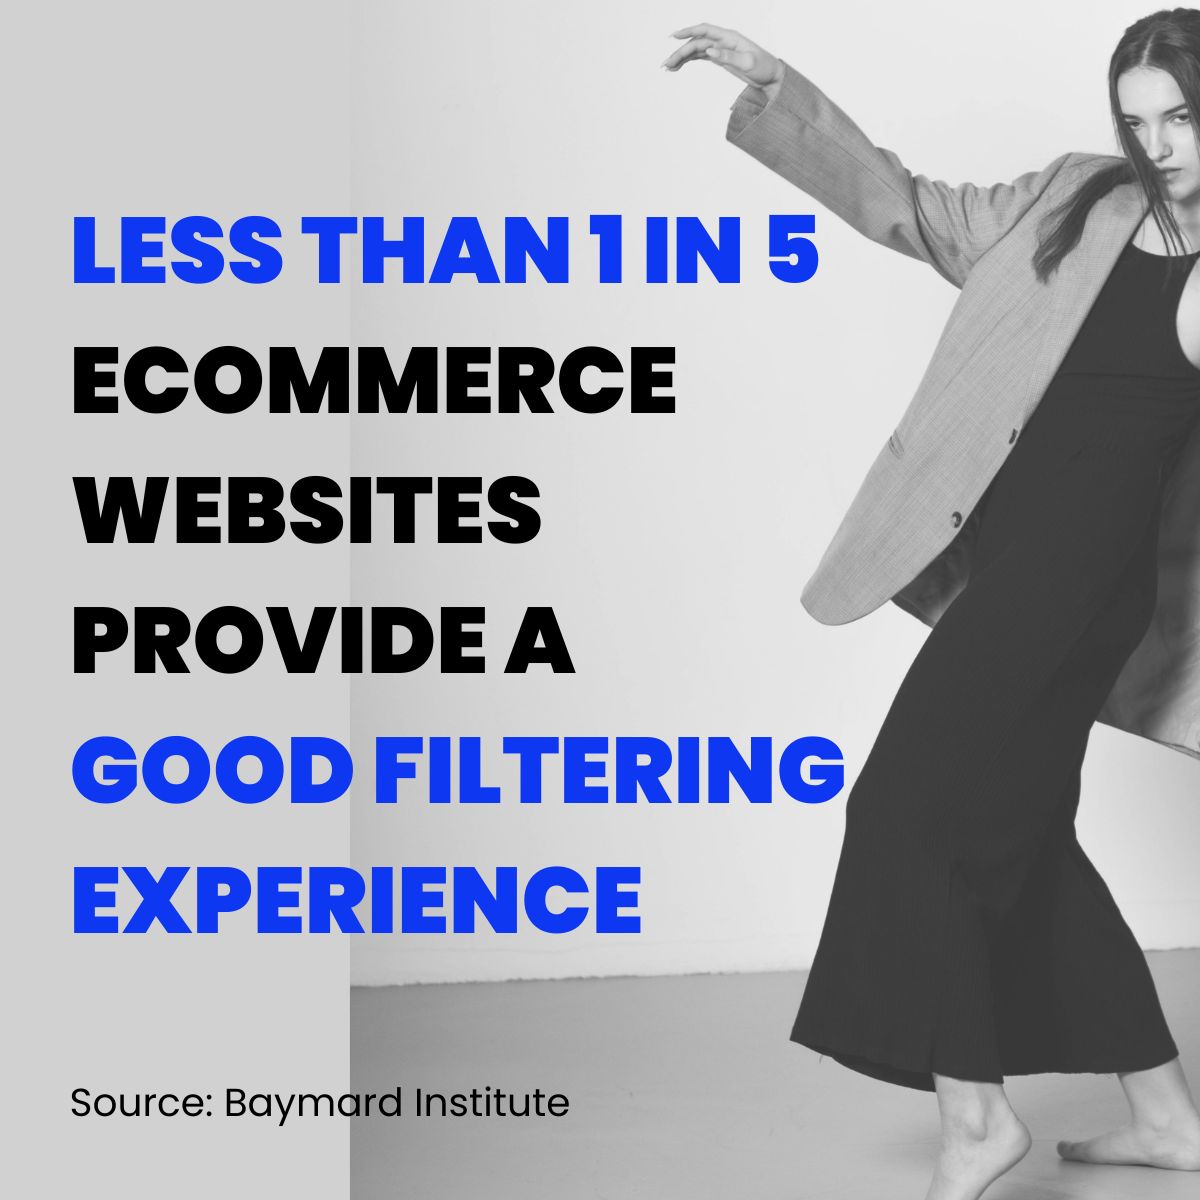 An image of a woman in a dress with text that less than 1 in 5 ecommerce offer a good filtering experience